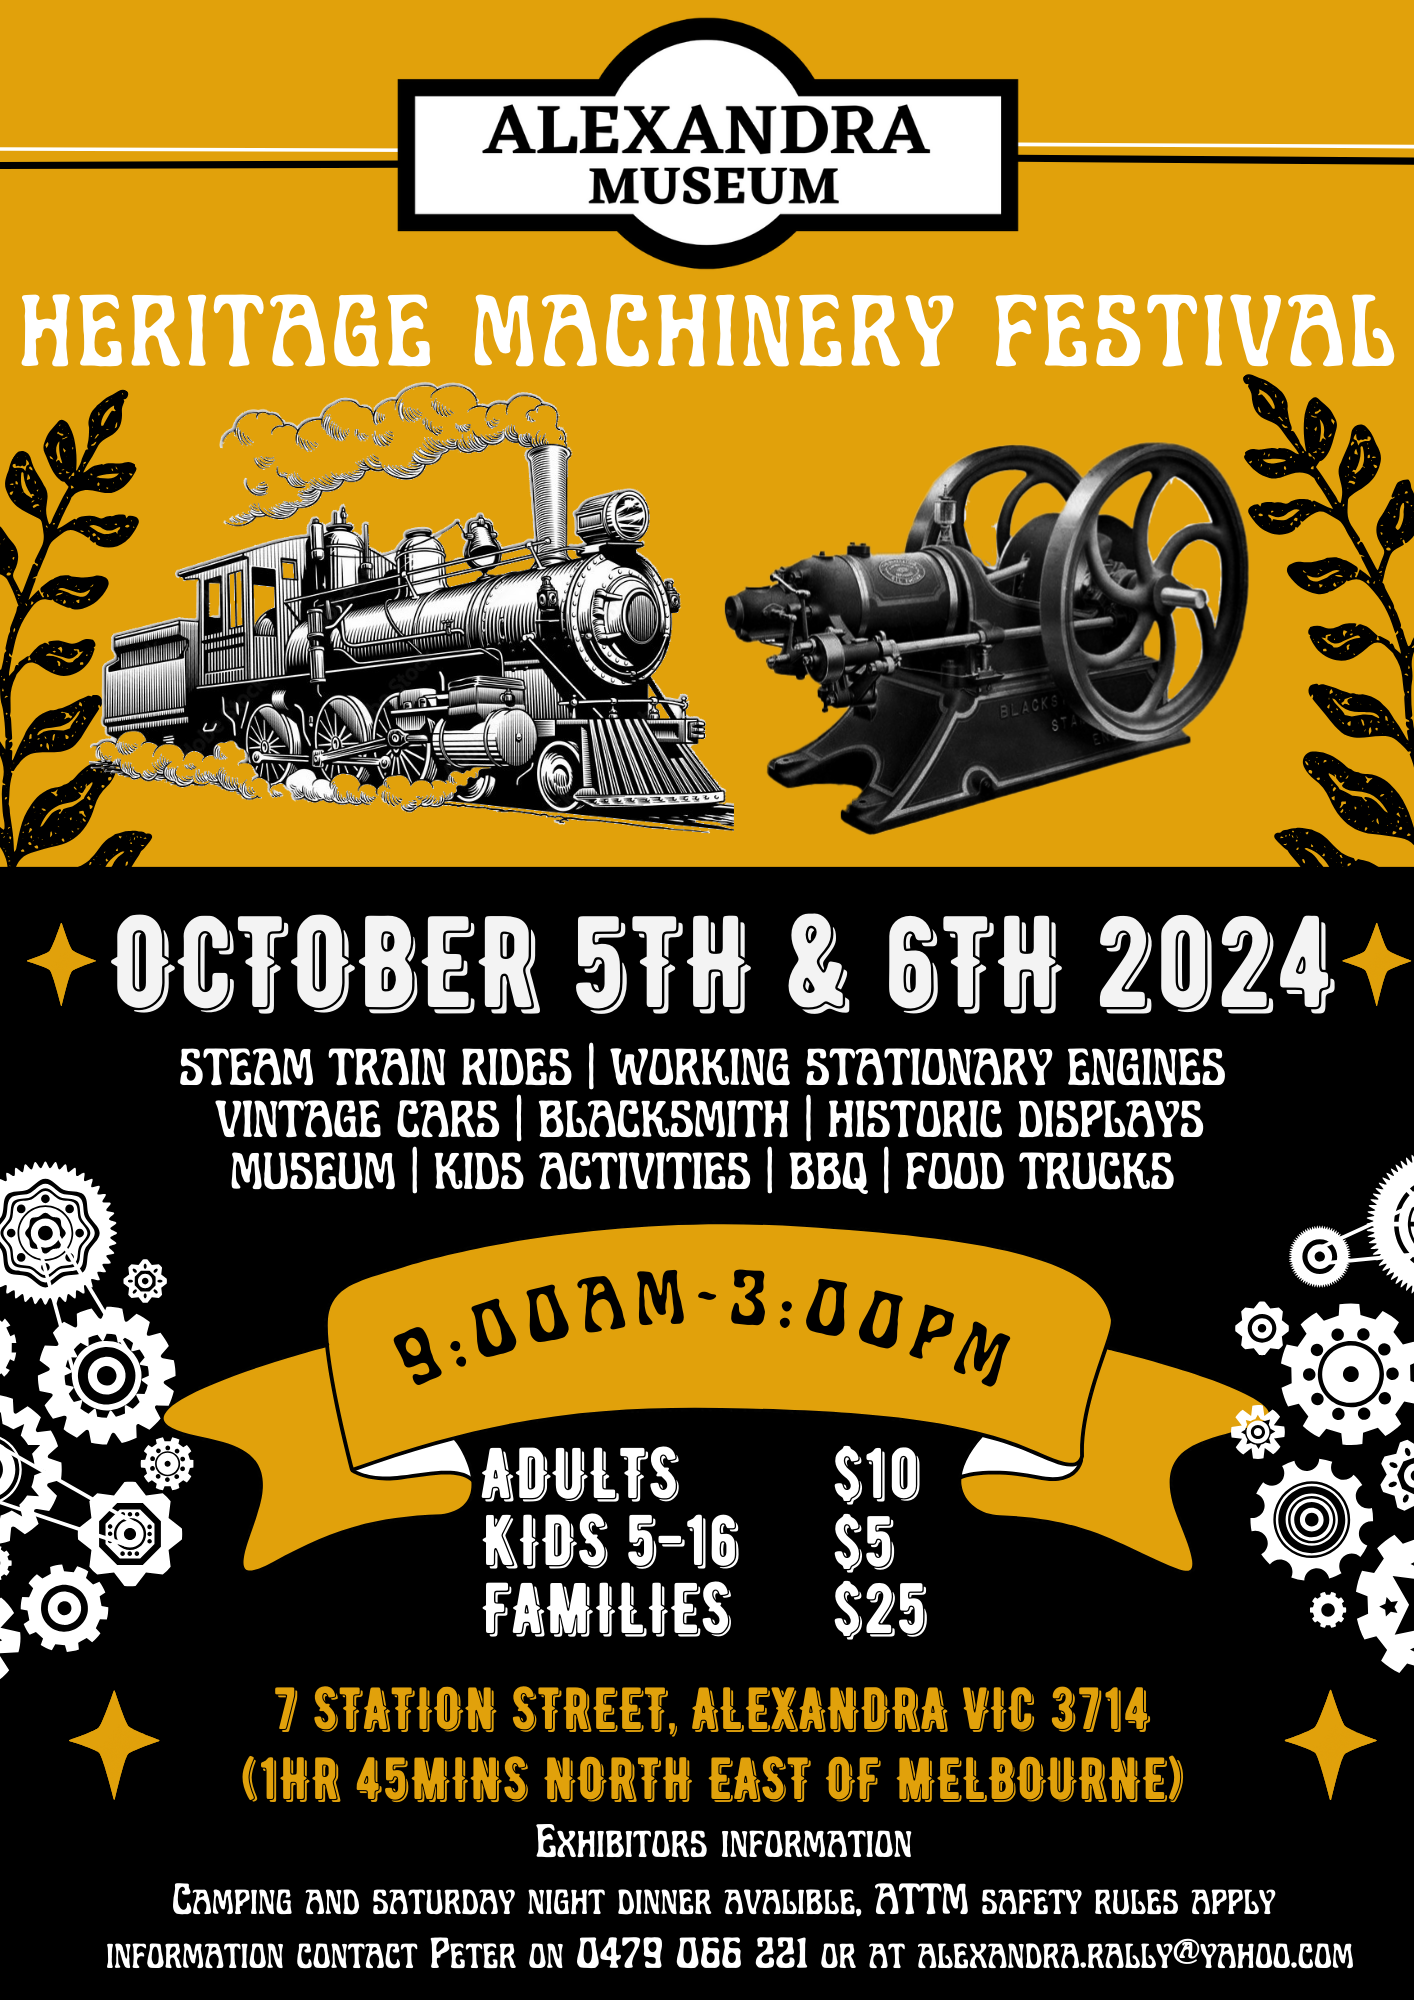 Heritage machinery festival flyer 2024